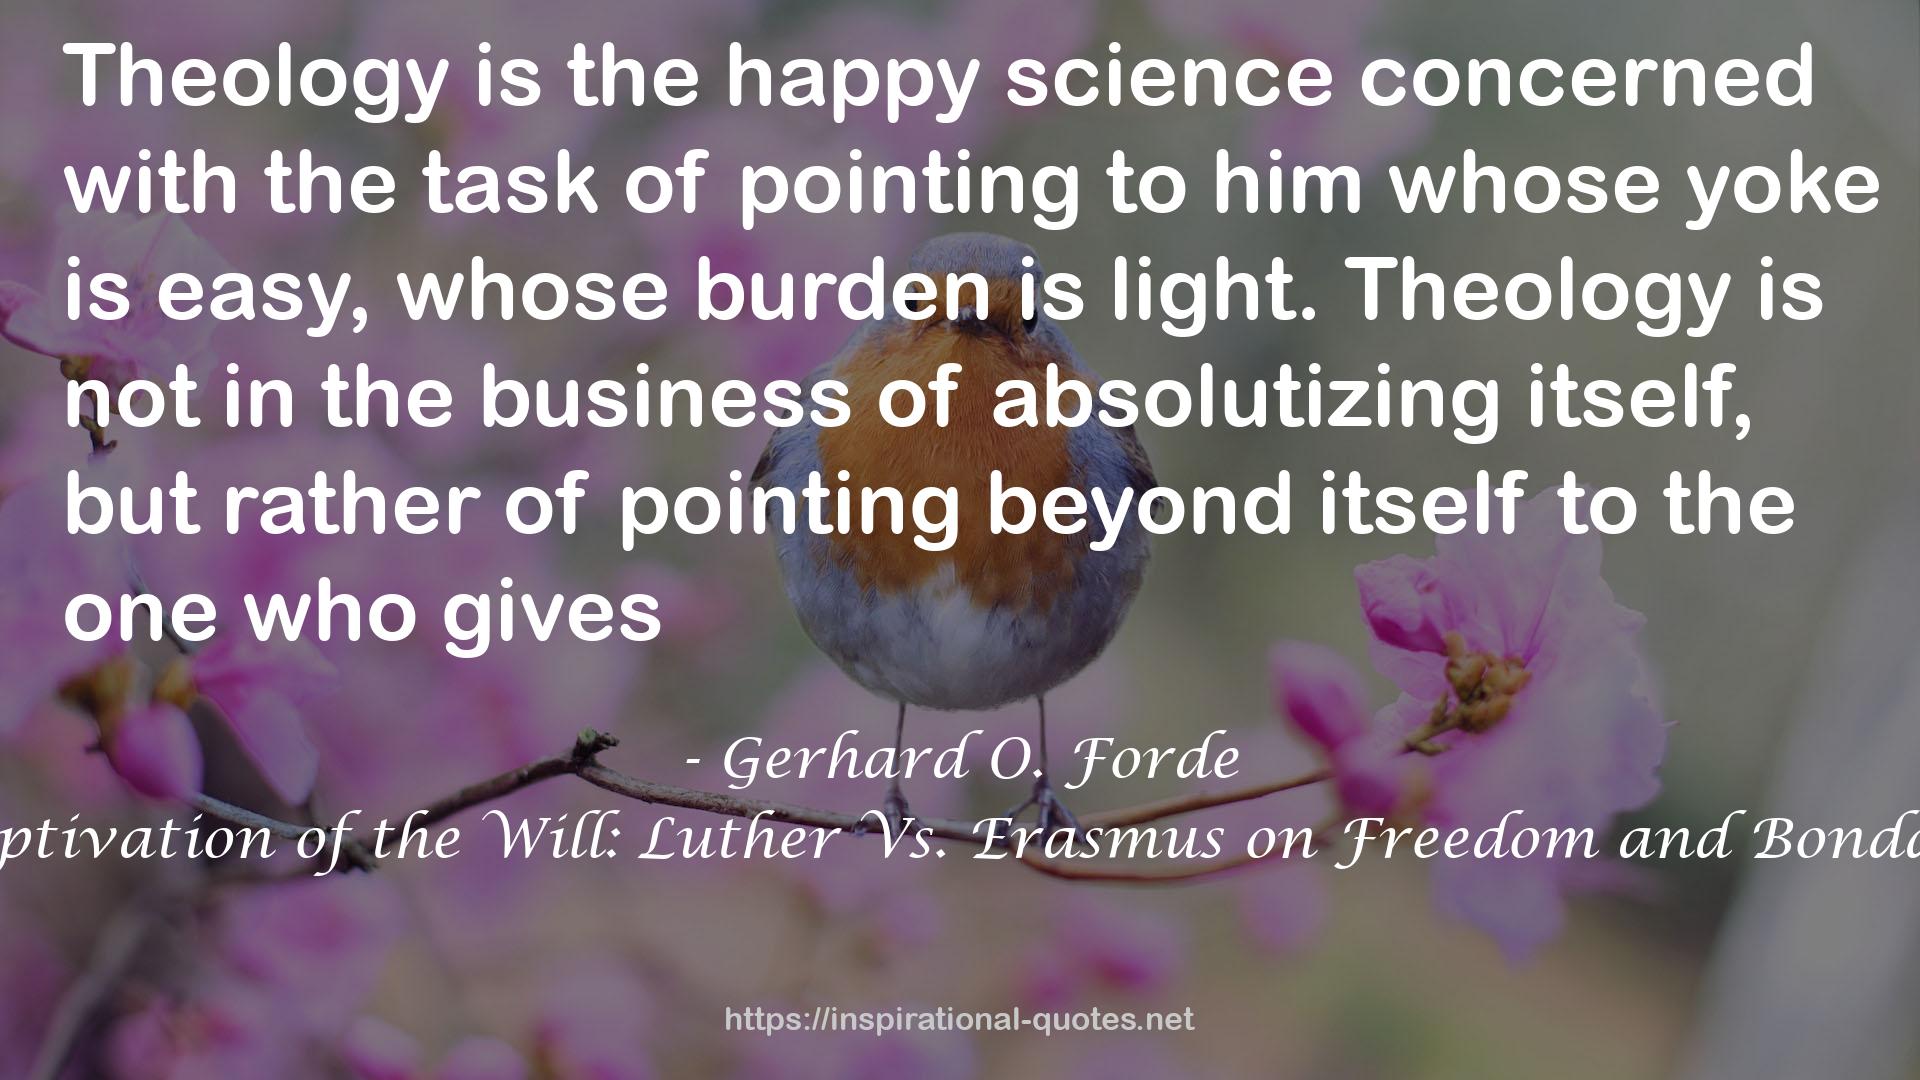 Captivation of the Will: Luther Vs. Erasmus on Freedom and Bondage QUOTES